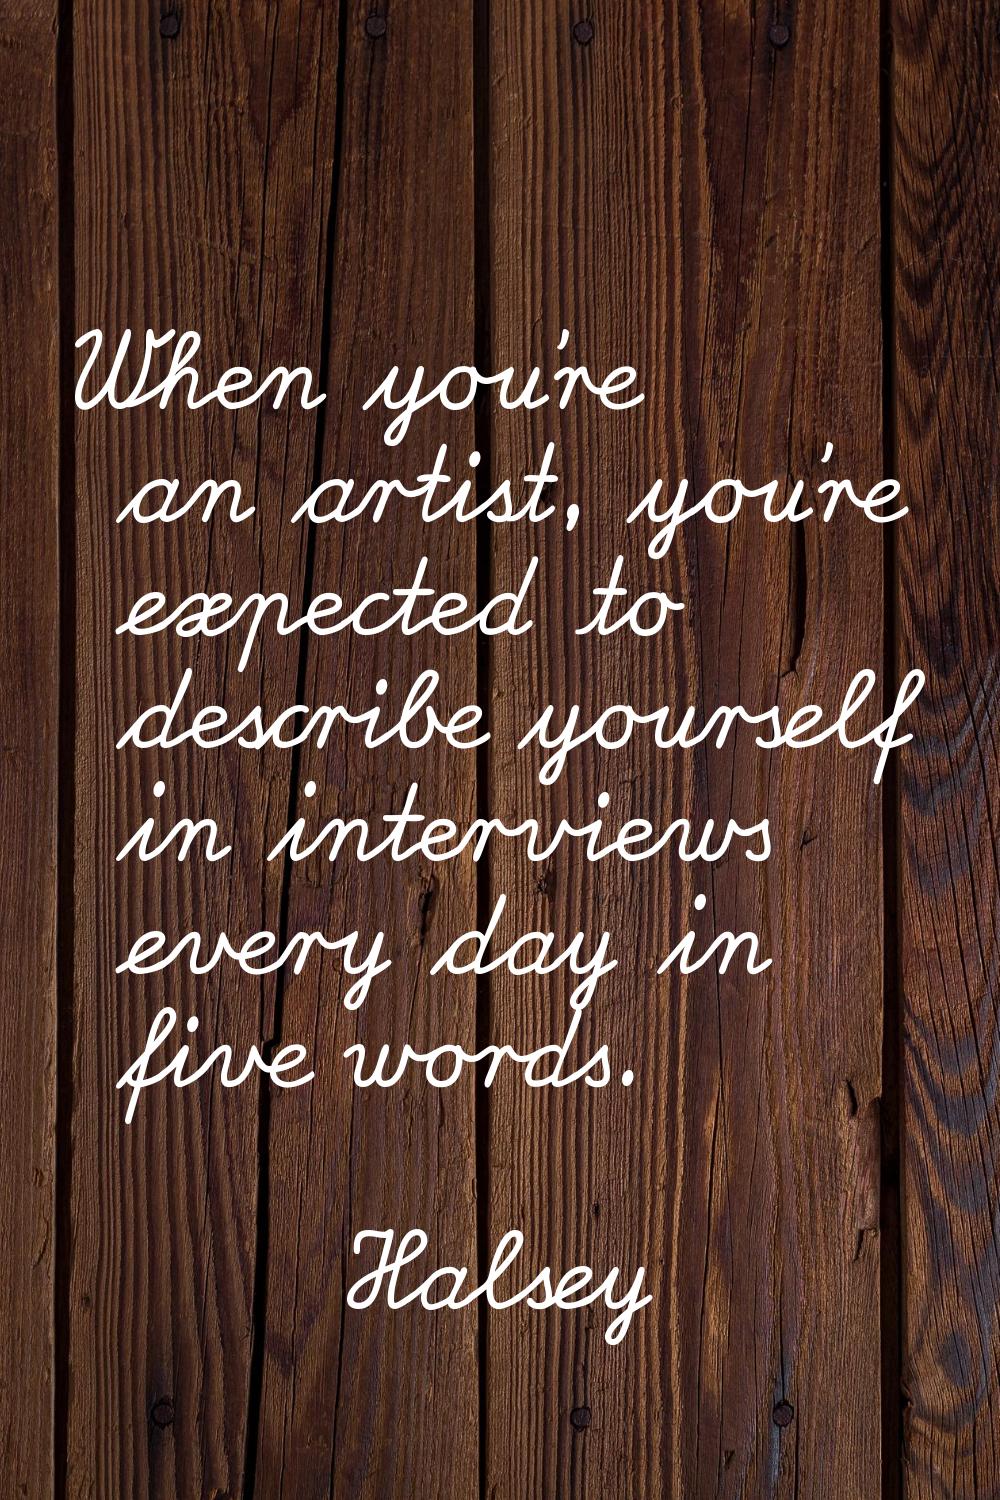 When you're an artist, you're expected to describe yourself in interviews every day in five words.